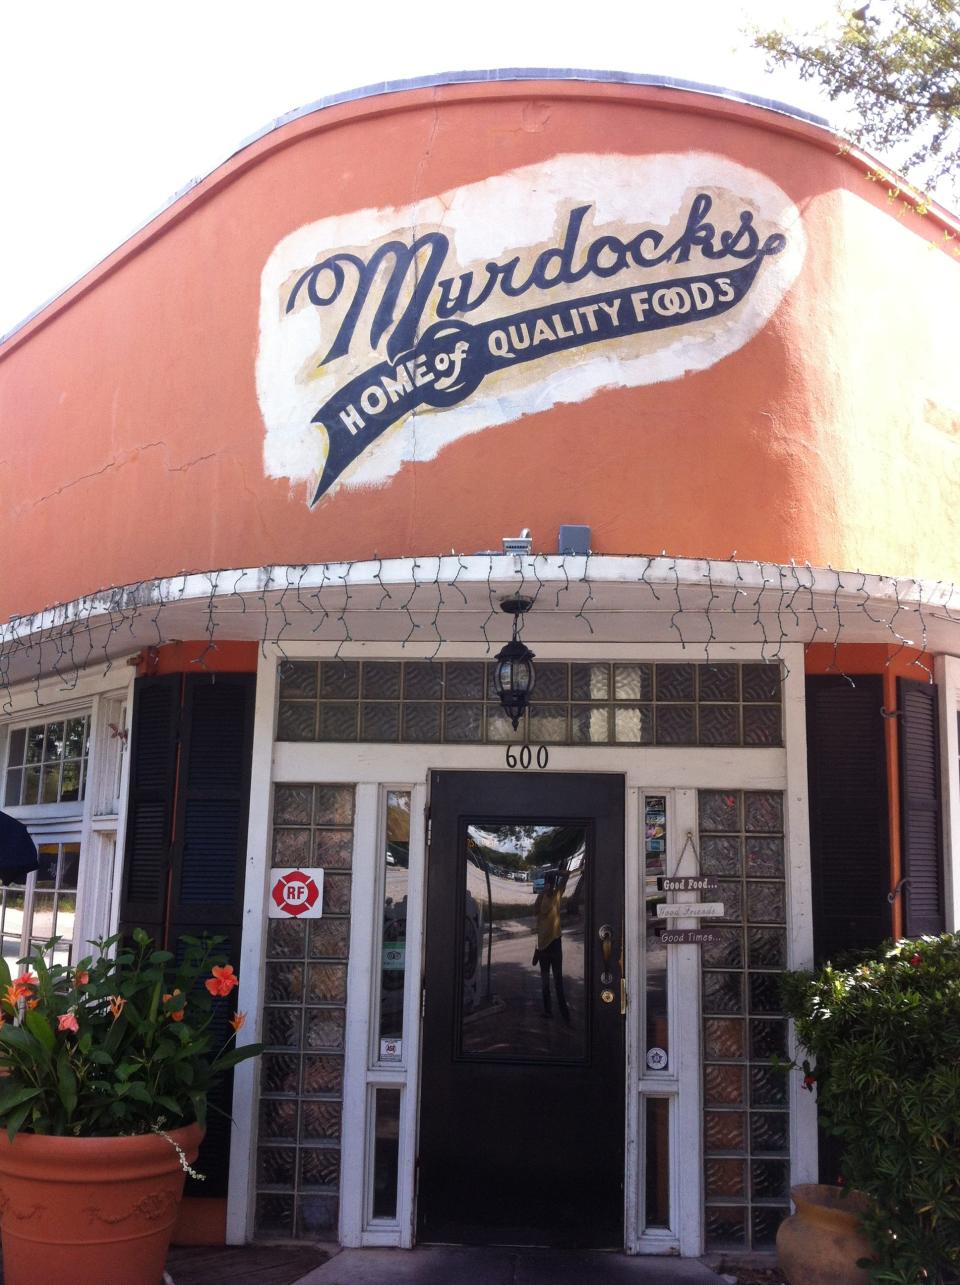 Murdock's in Cocoa Village has outdoor seating in the front and on a covered patio in the back.